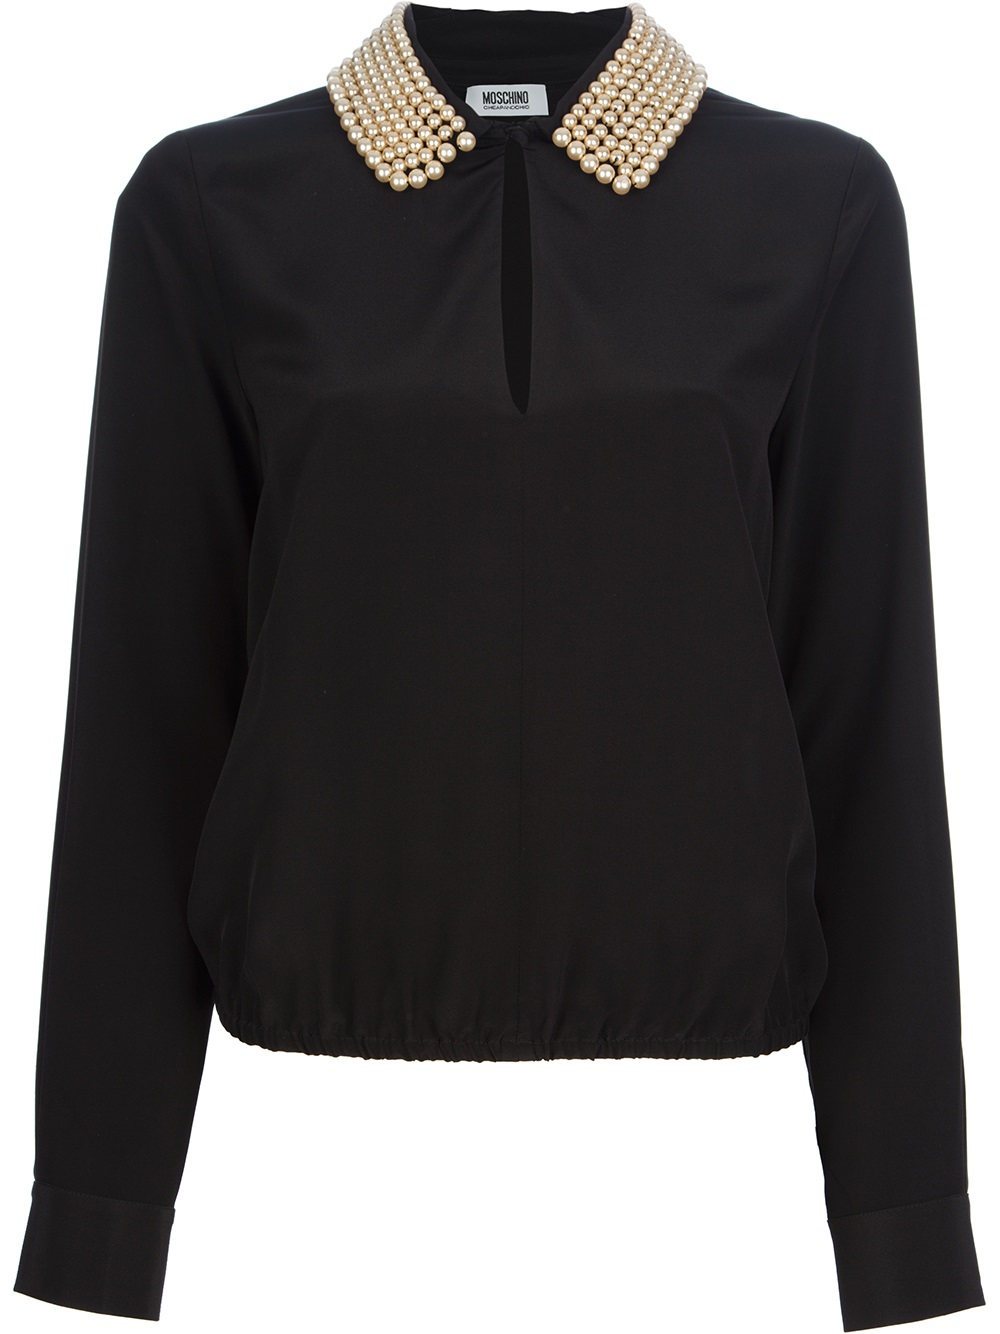 Boutique Moschino Pearl Collar Blouse in Black | Lyst